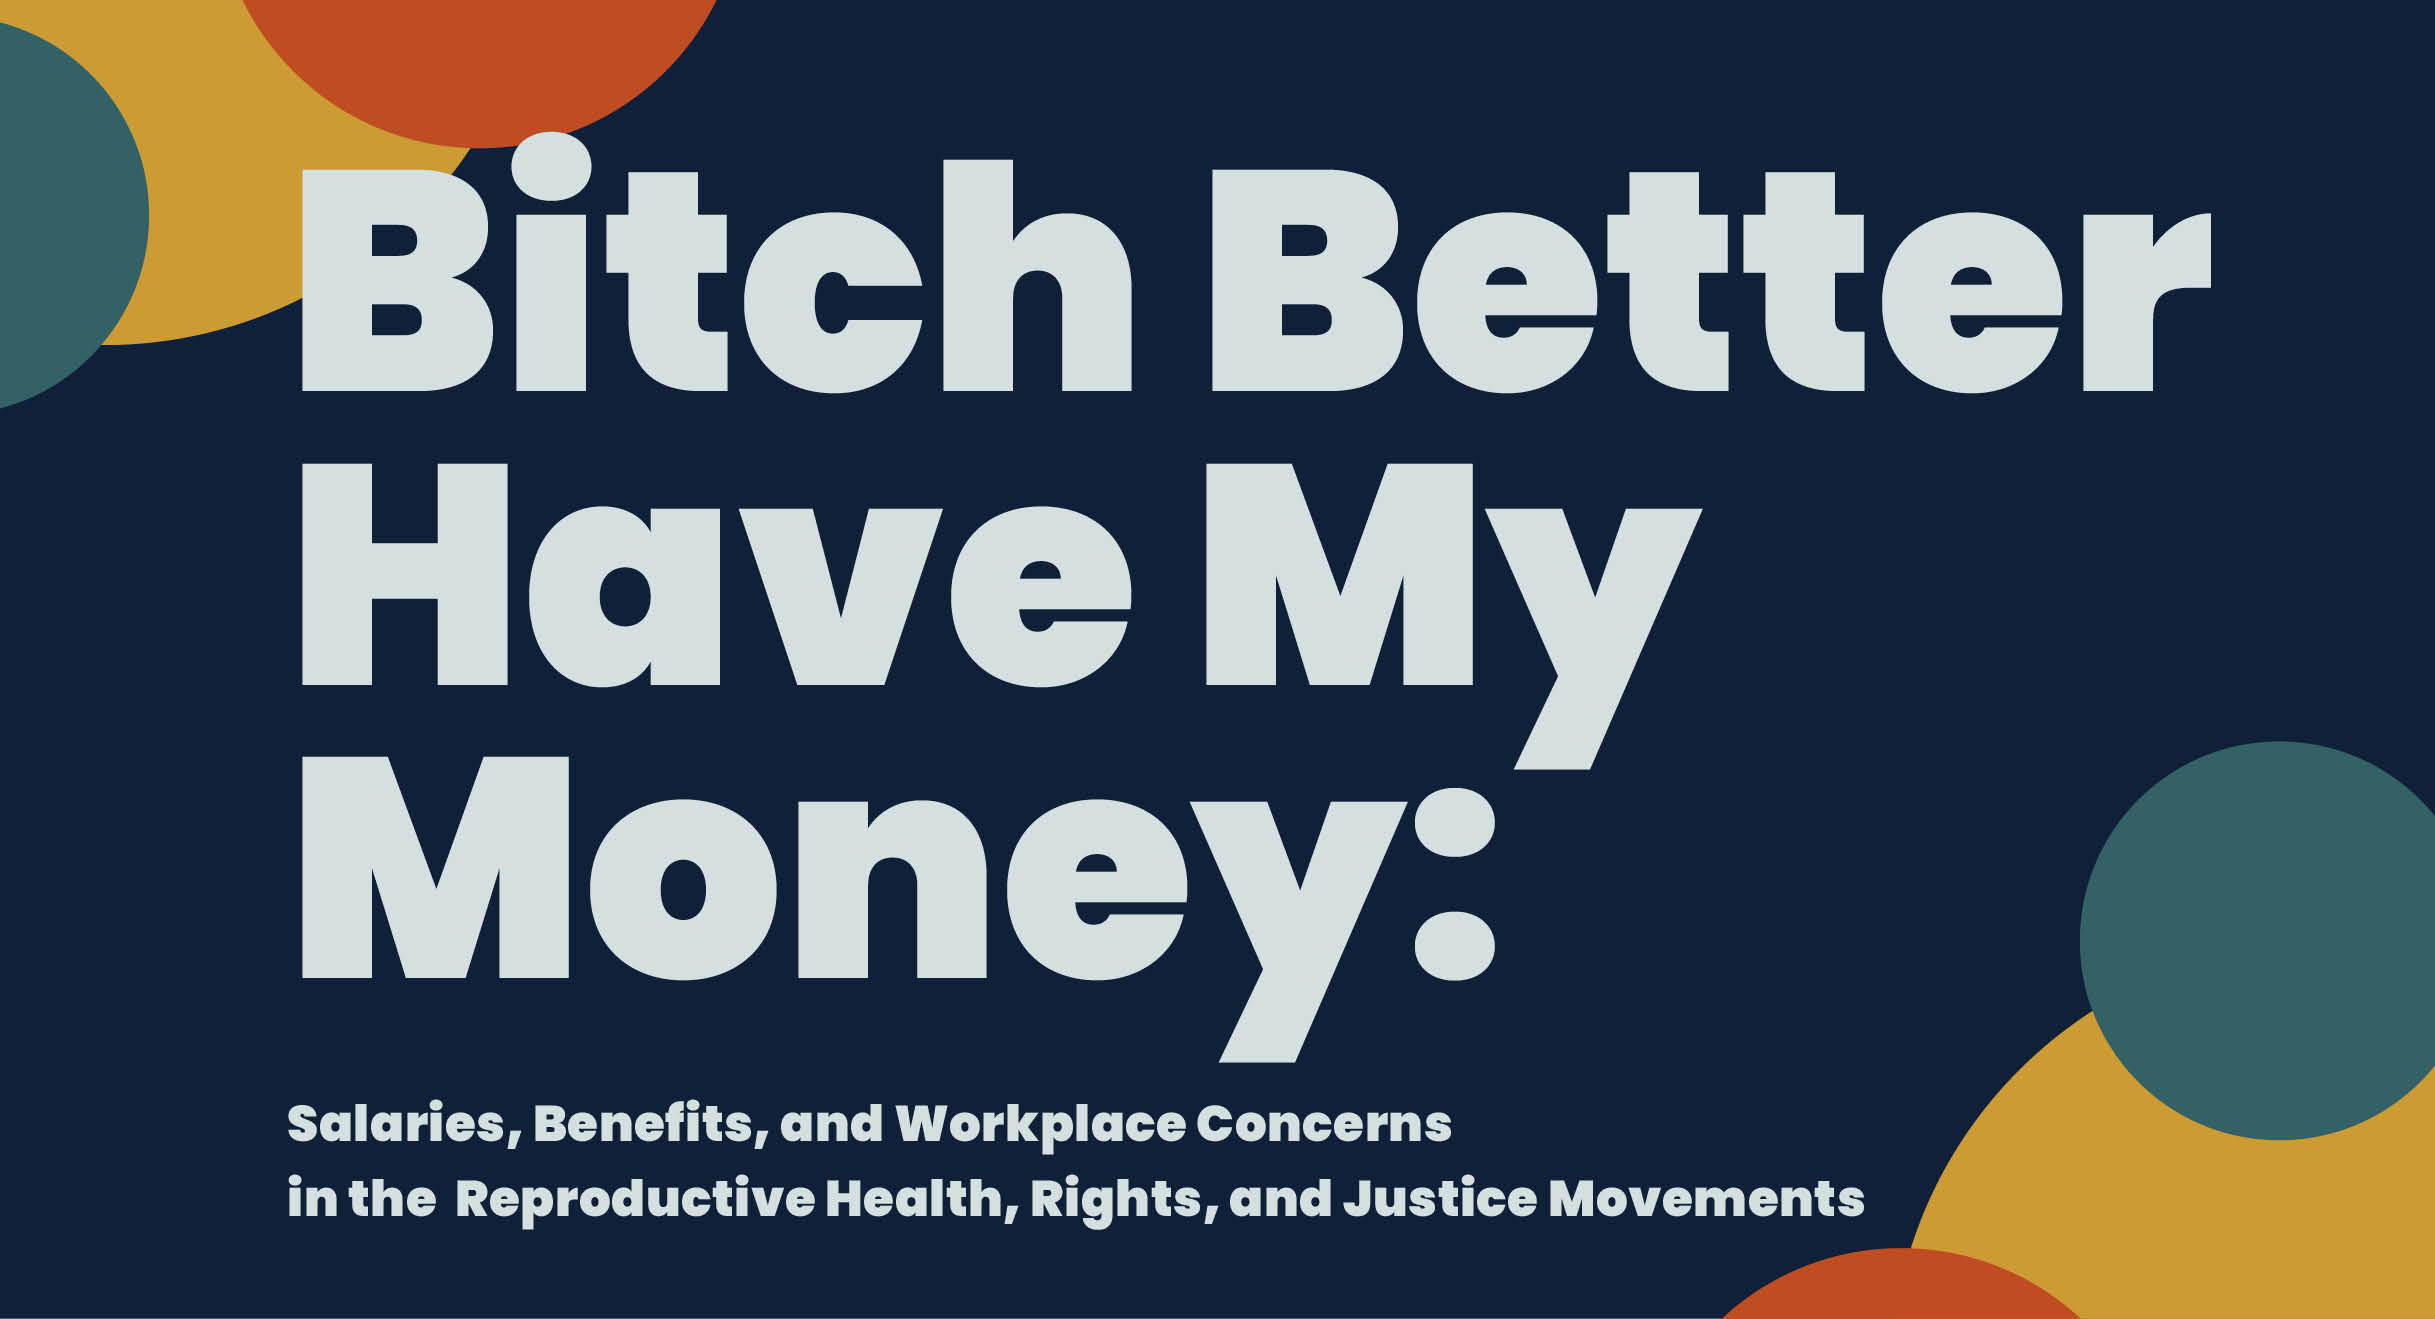 A zoomed-in and cropped cover to a report exploring salaries in the reproductive rights and justice movement, titled Bitch Better Have My Money.